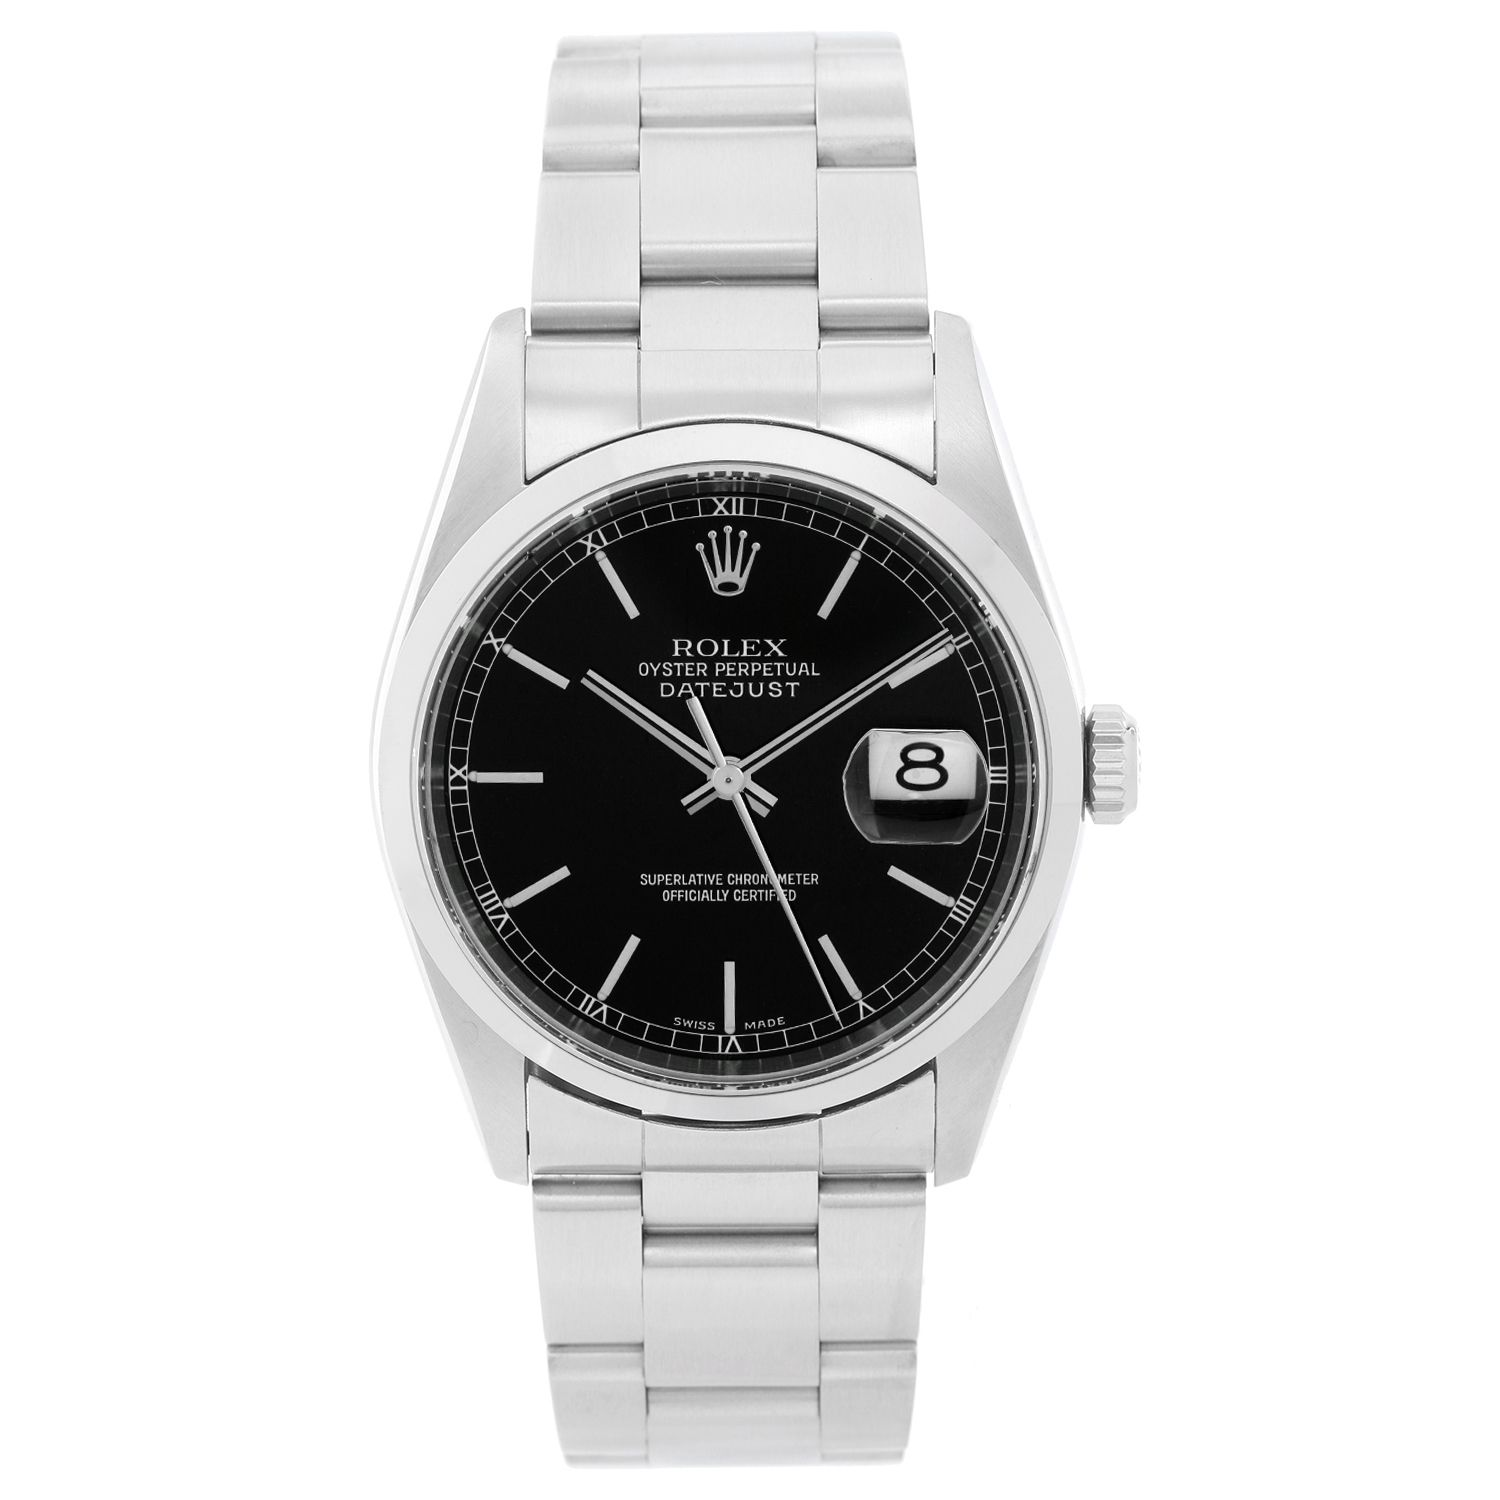 Stainless Steel Watch 16200 Black Dial